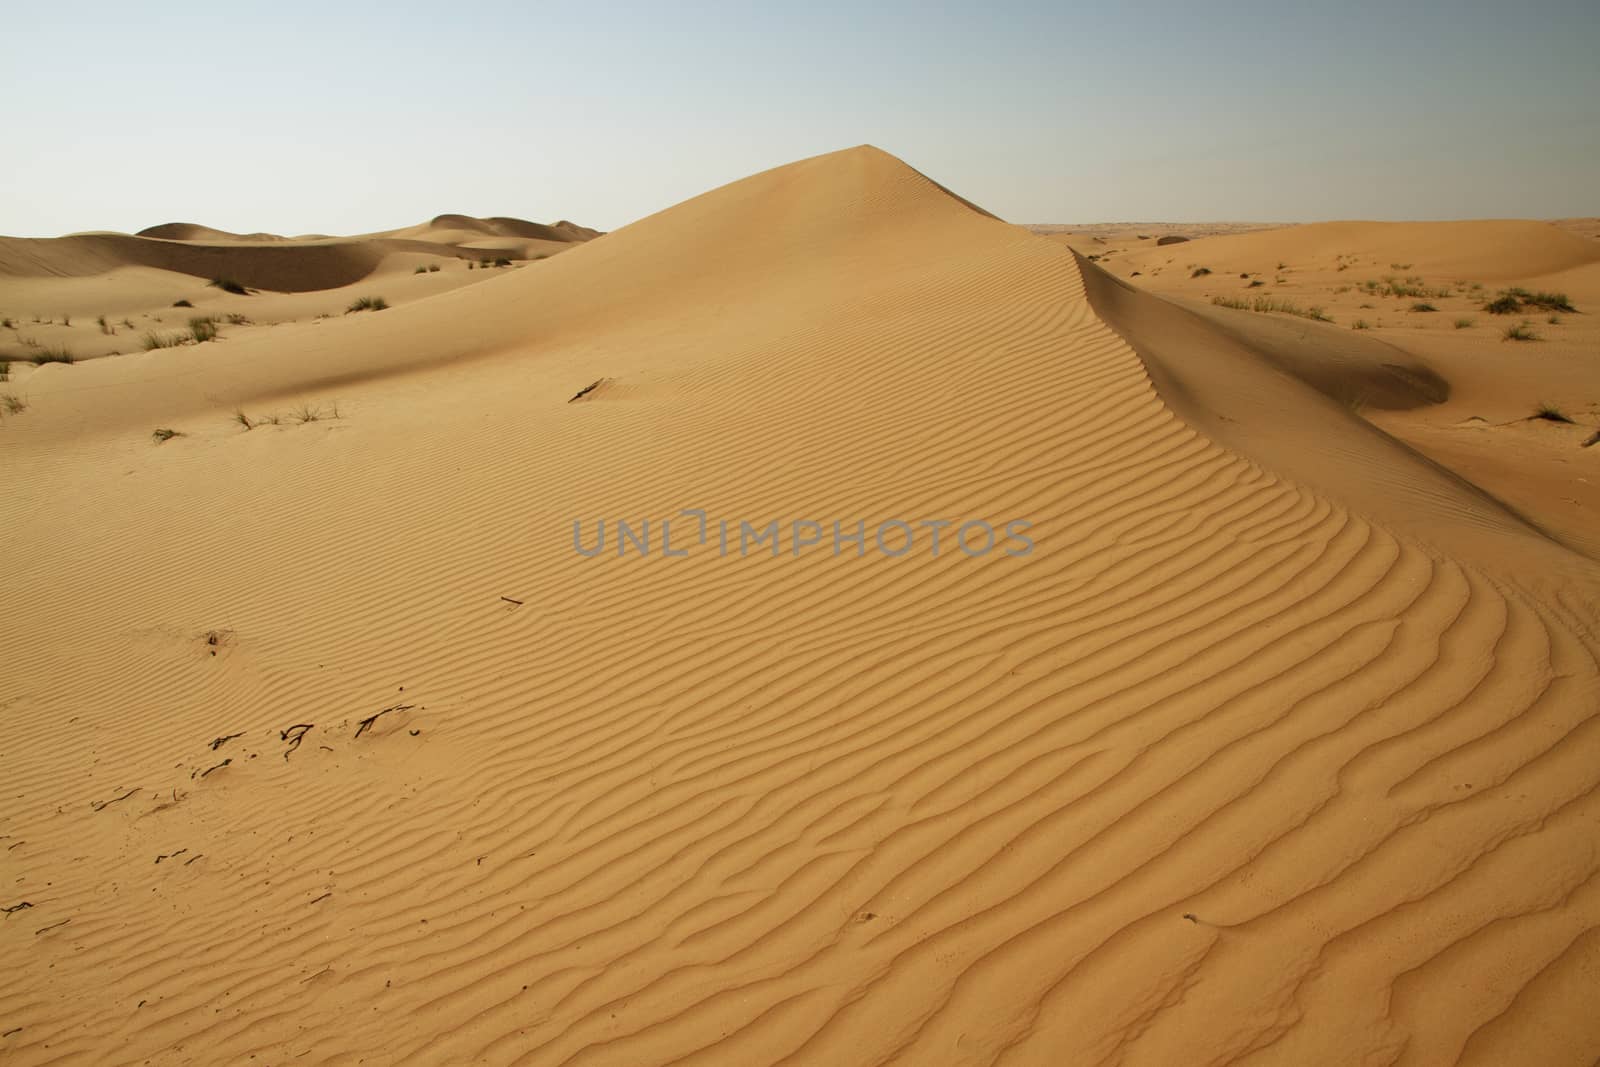 A dune landscape in the Rub al Khali or Empty Quarter. Straddling Oman, Saudi Arabia, the UAE and Yemen, this is the largest sand desert in the world